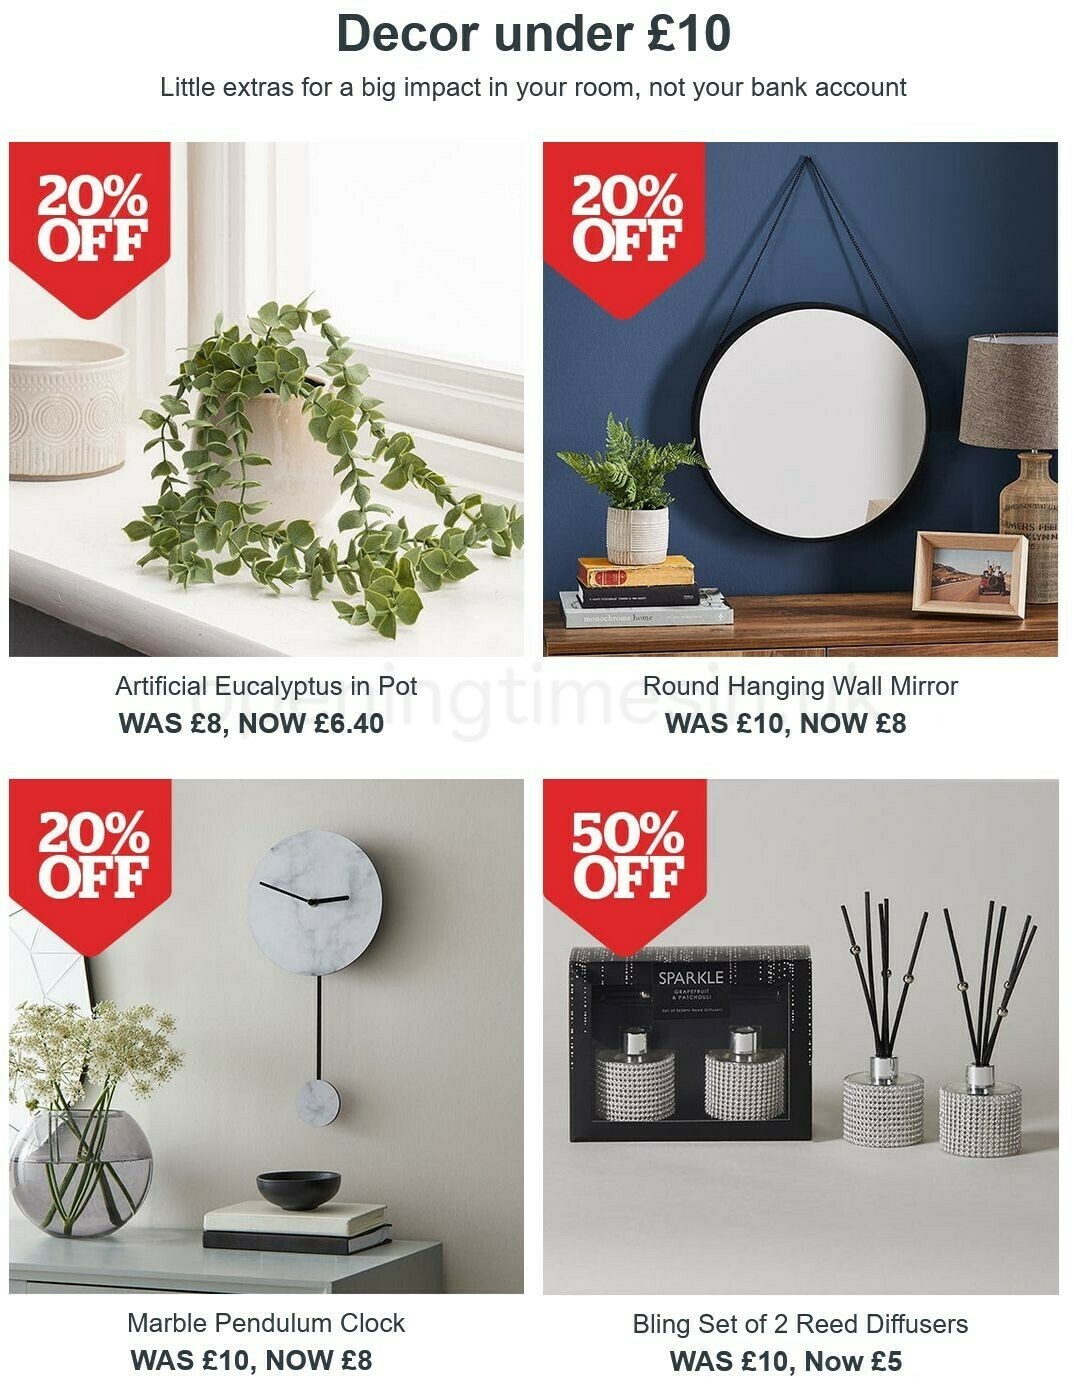 Dunelm Offers from 28 May